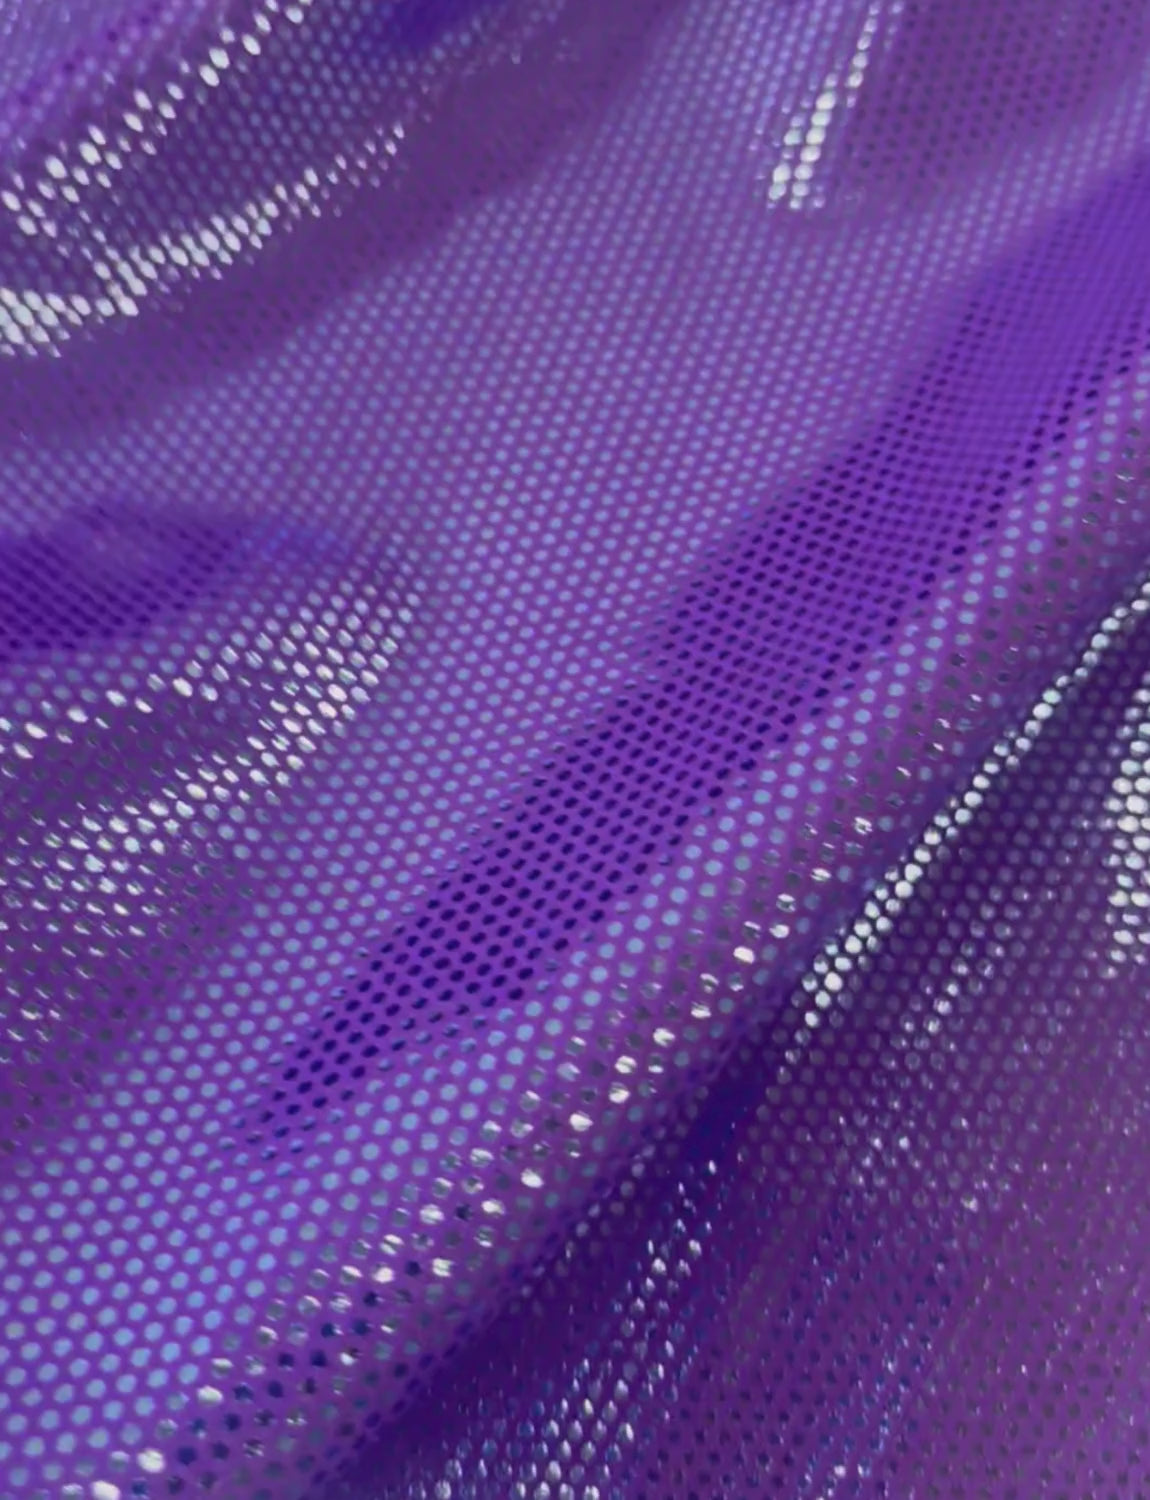 Blue spotted foil on purple stretch fabric.